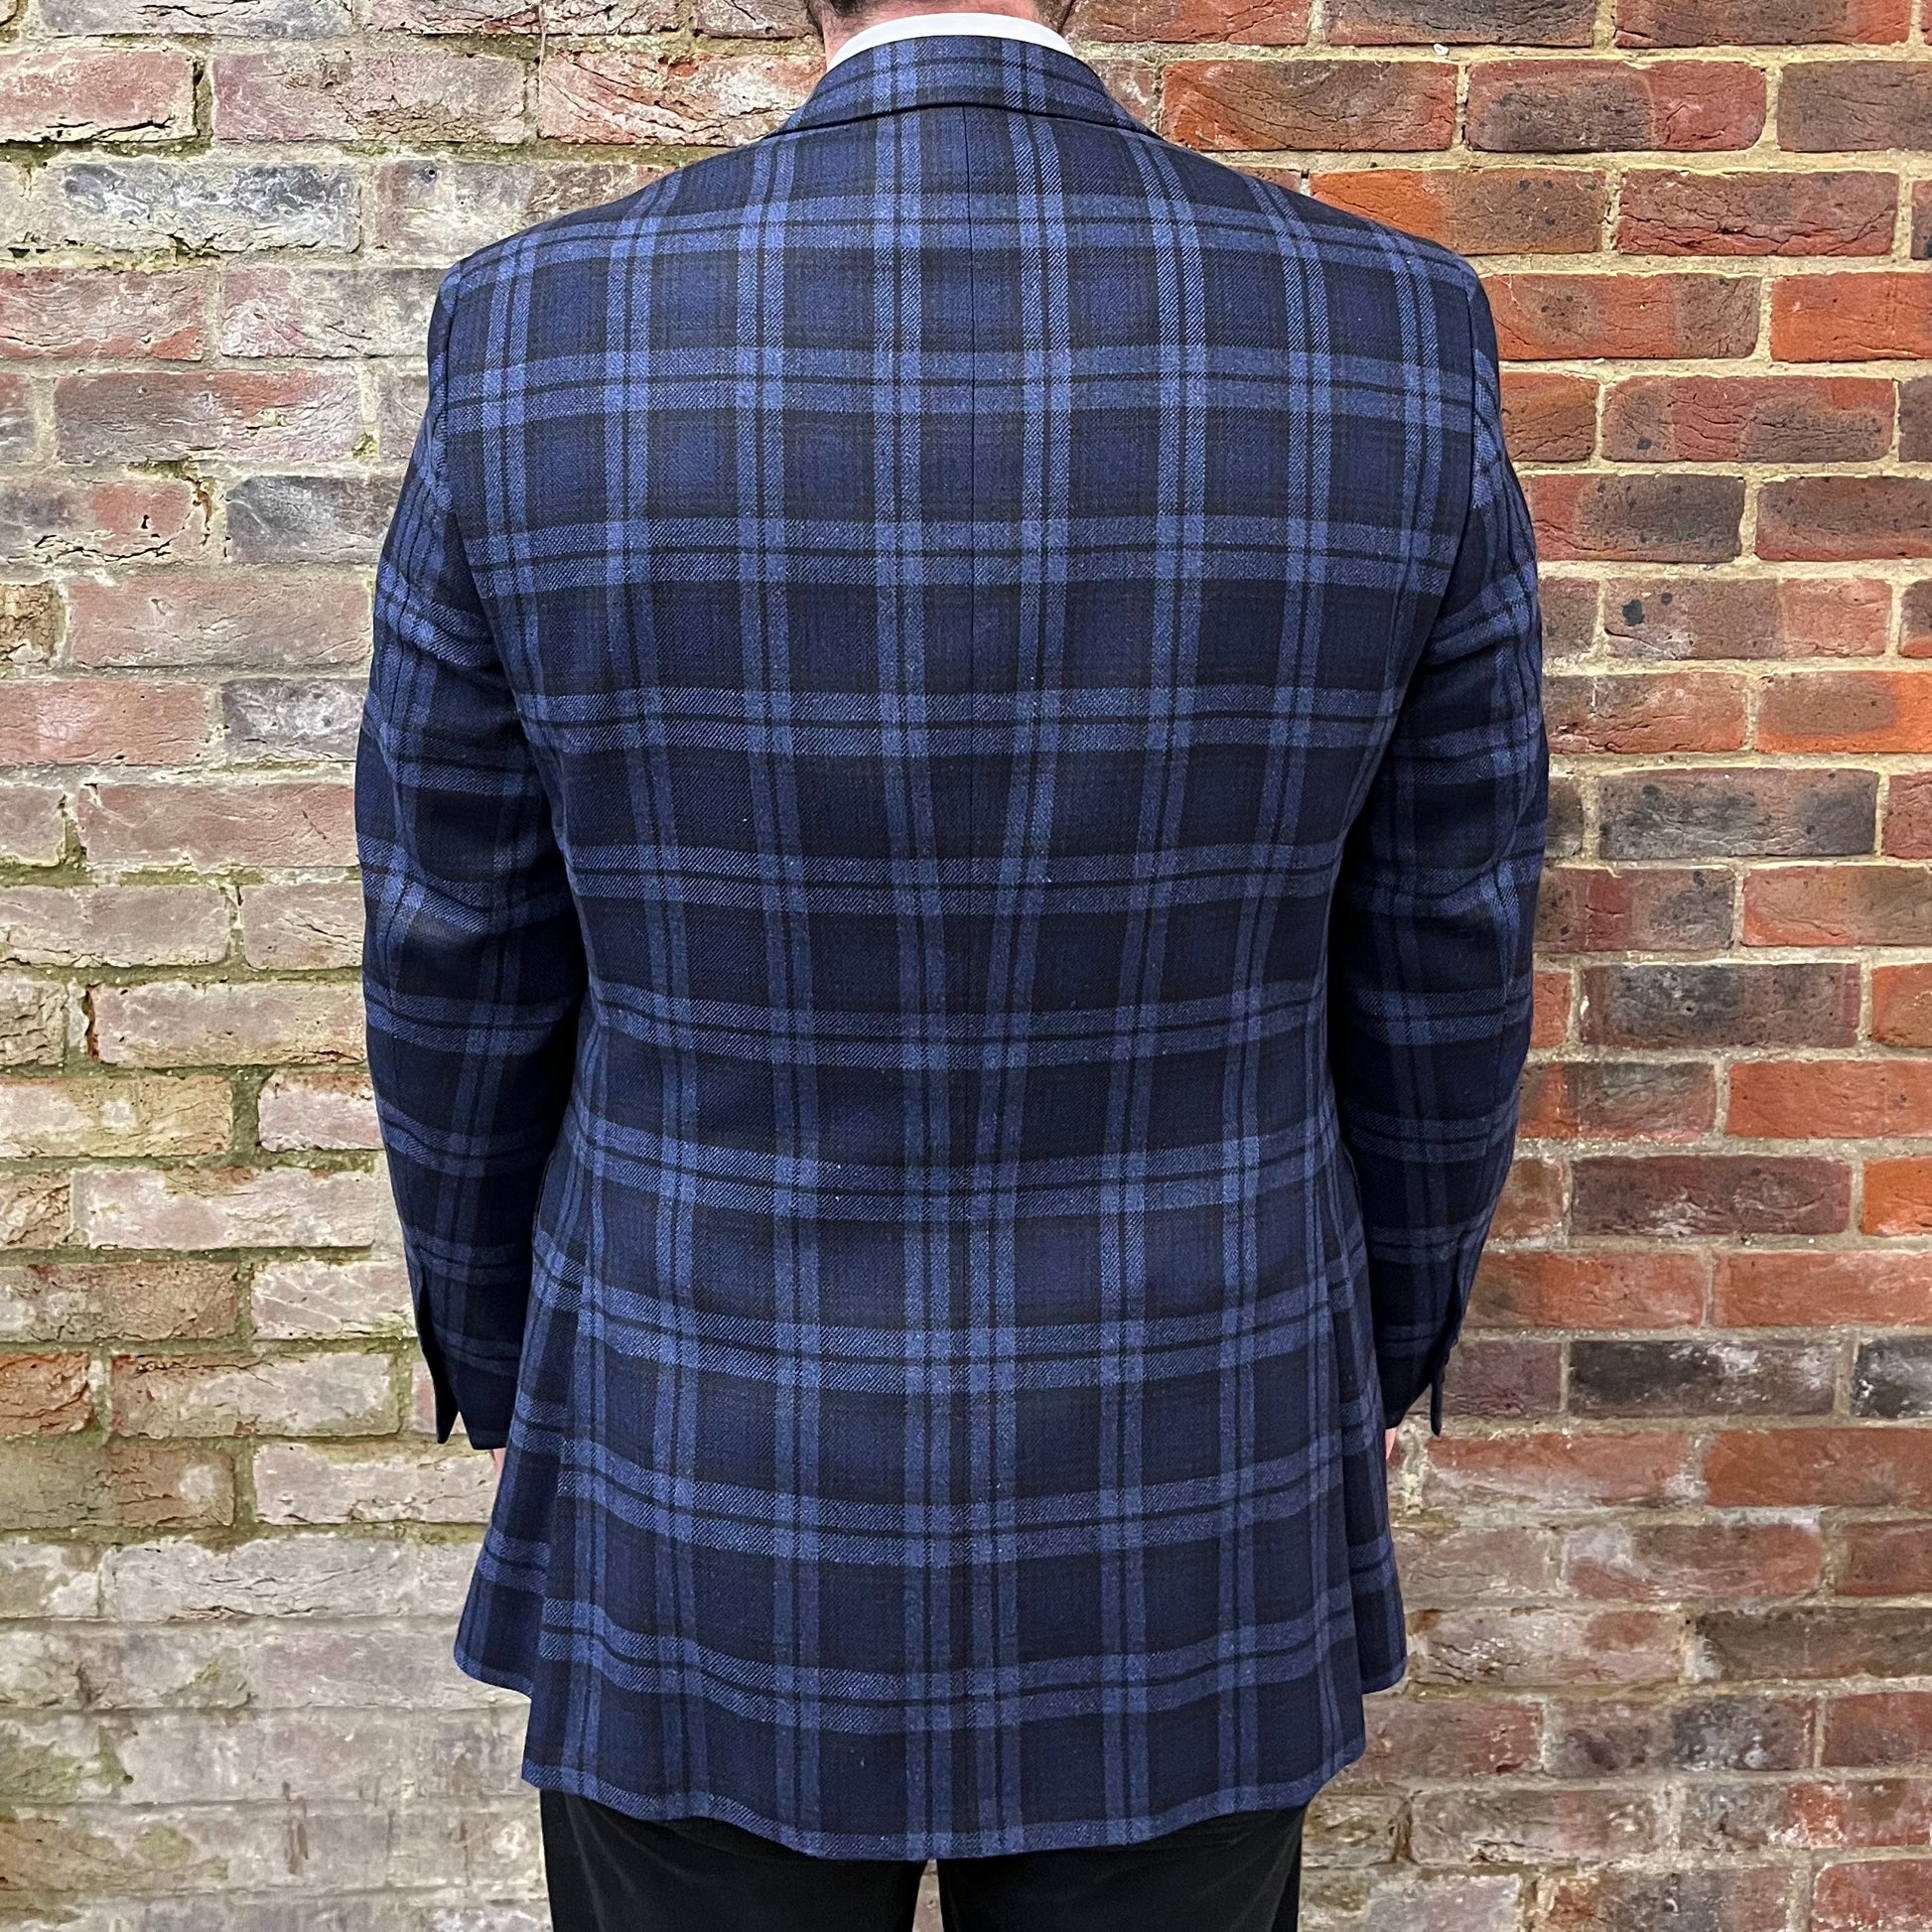 Regent 'The Toad' Jacket - Navy with Light Blue and Black Overcheck - rear